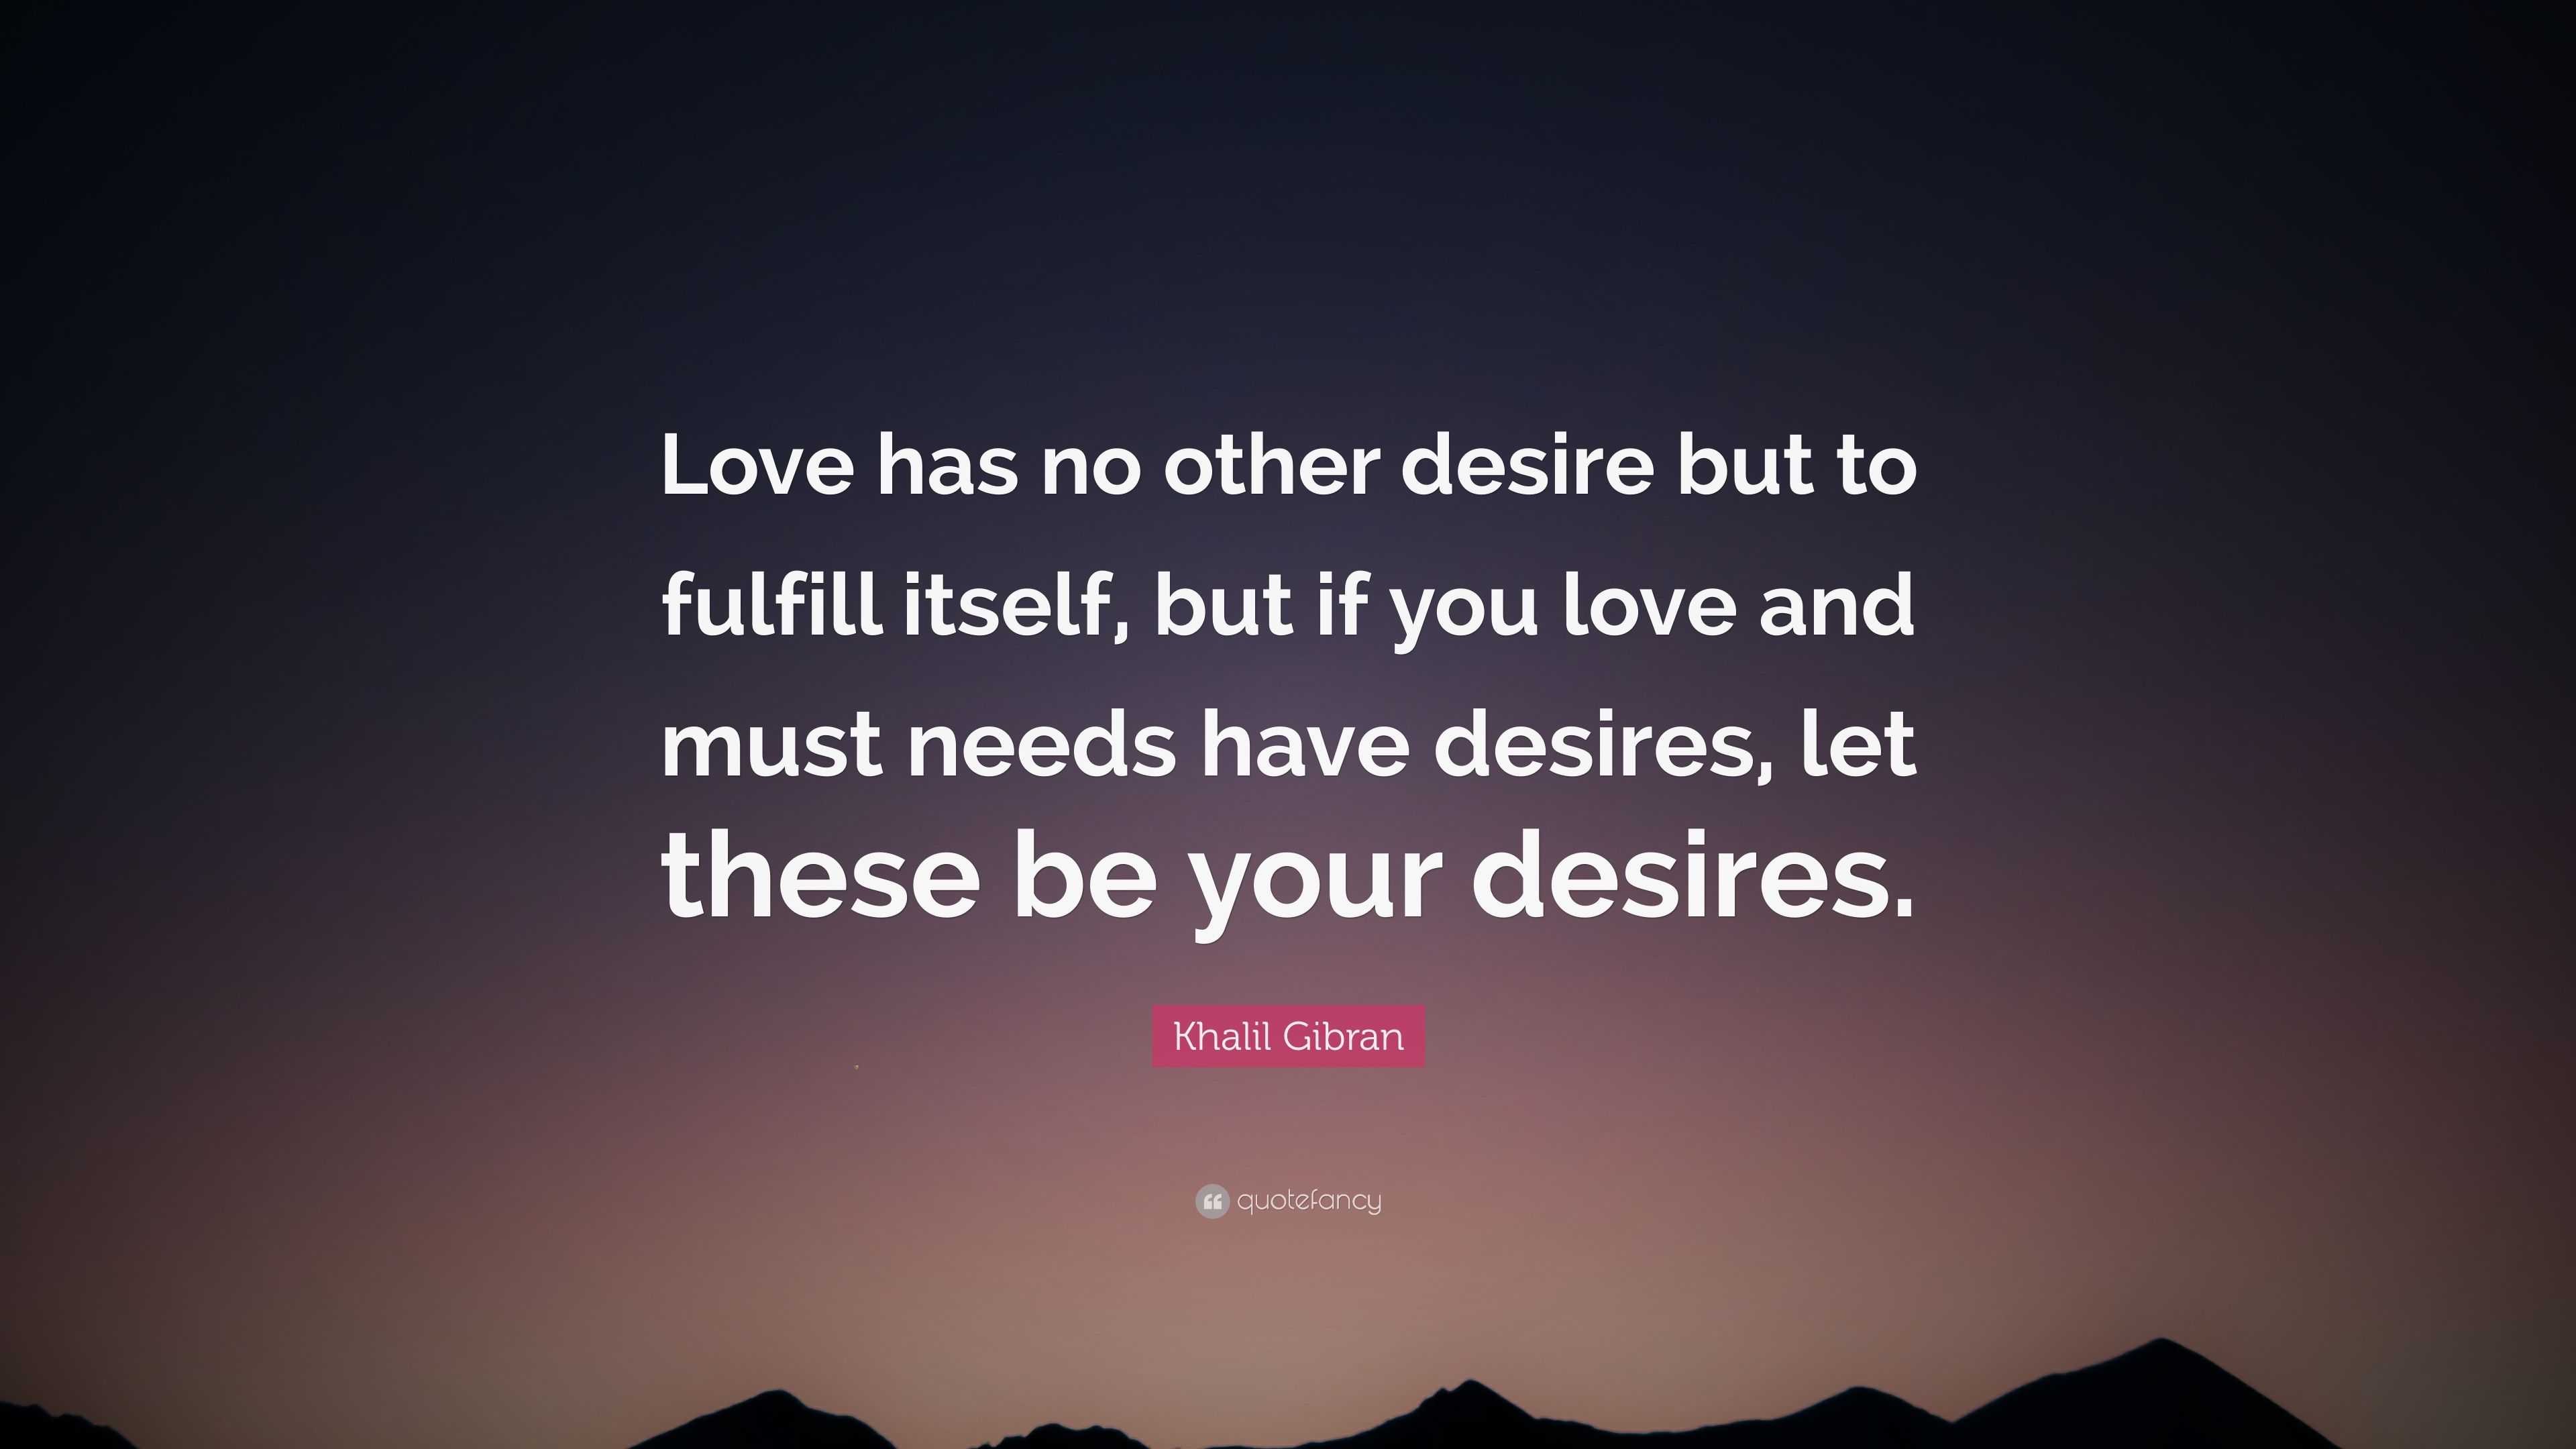 Khalil Gibran Quote: “Love has no other desire but to fulfill itself ...